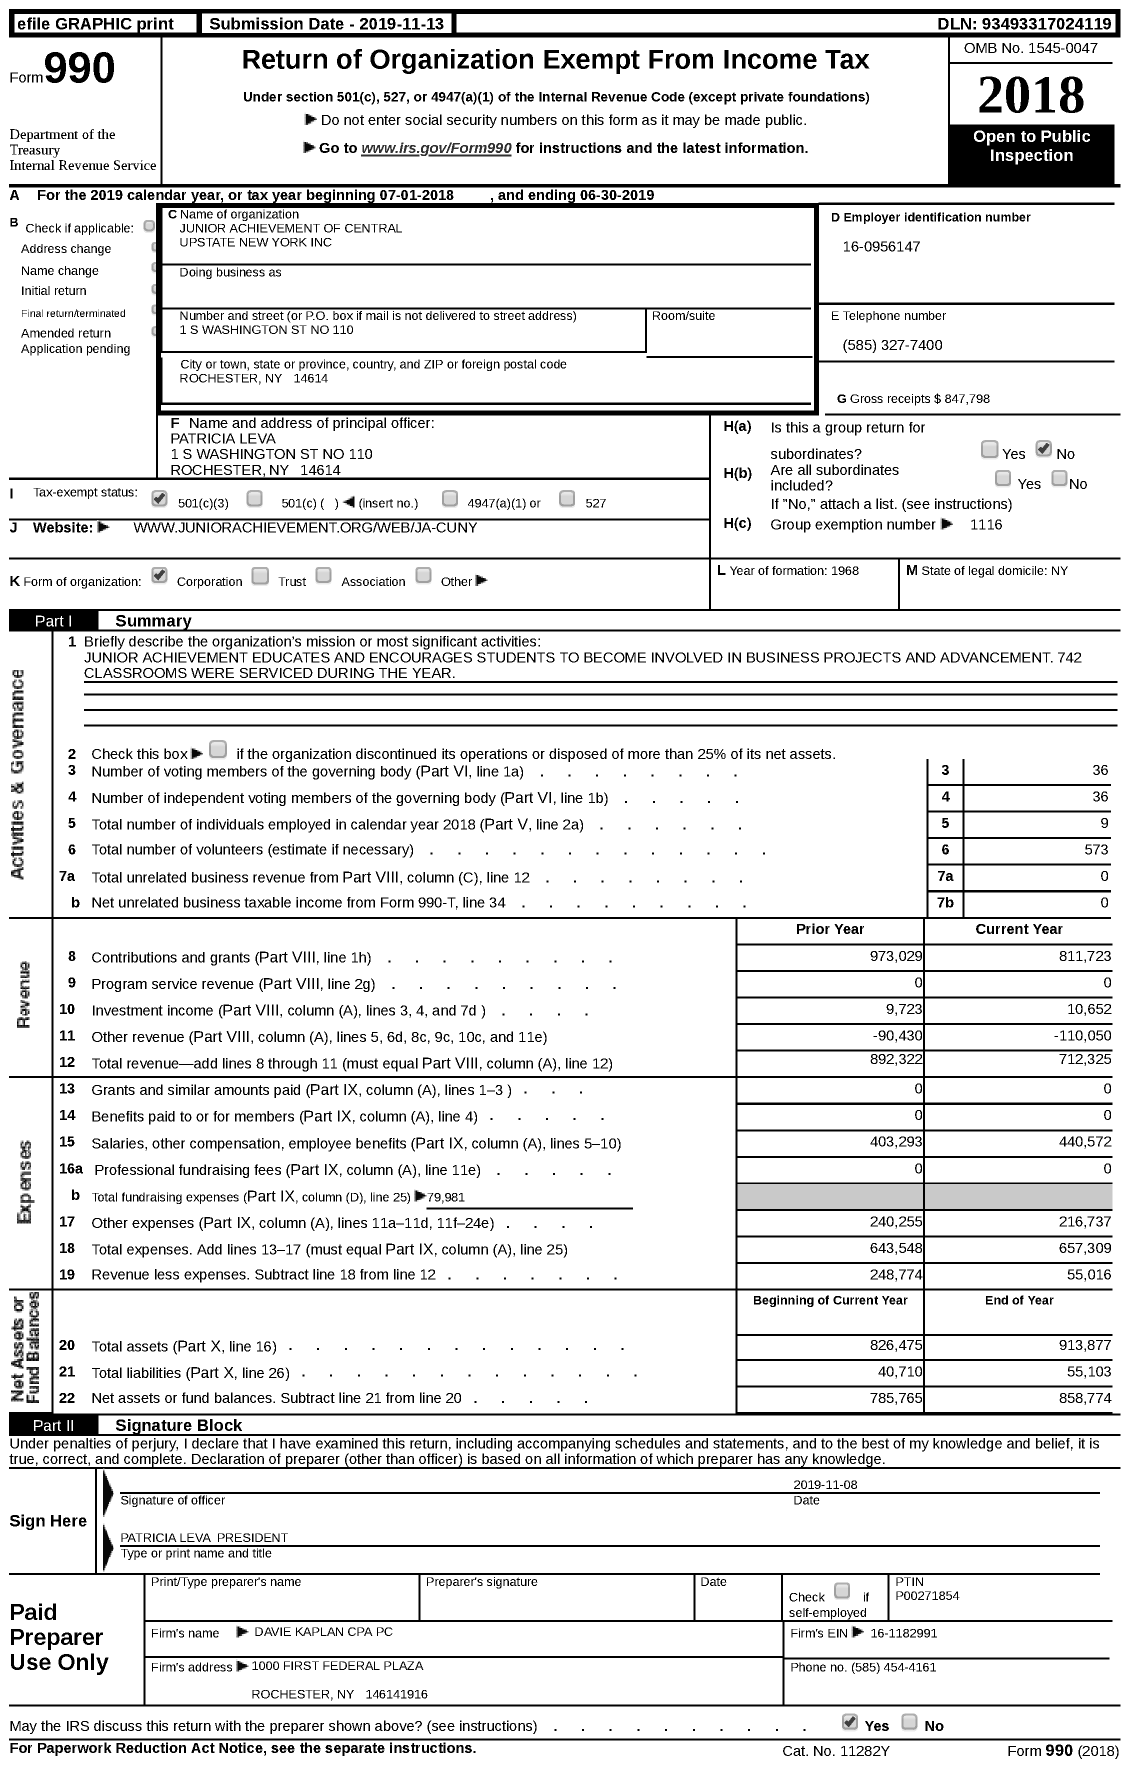 Image of first page of 2018 Form 990 for Junior Achievement of Central Upstate New York